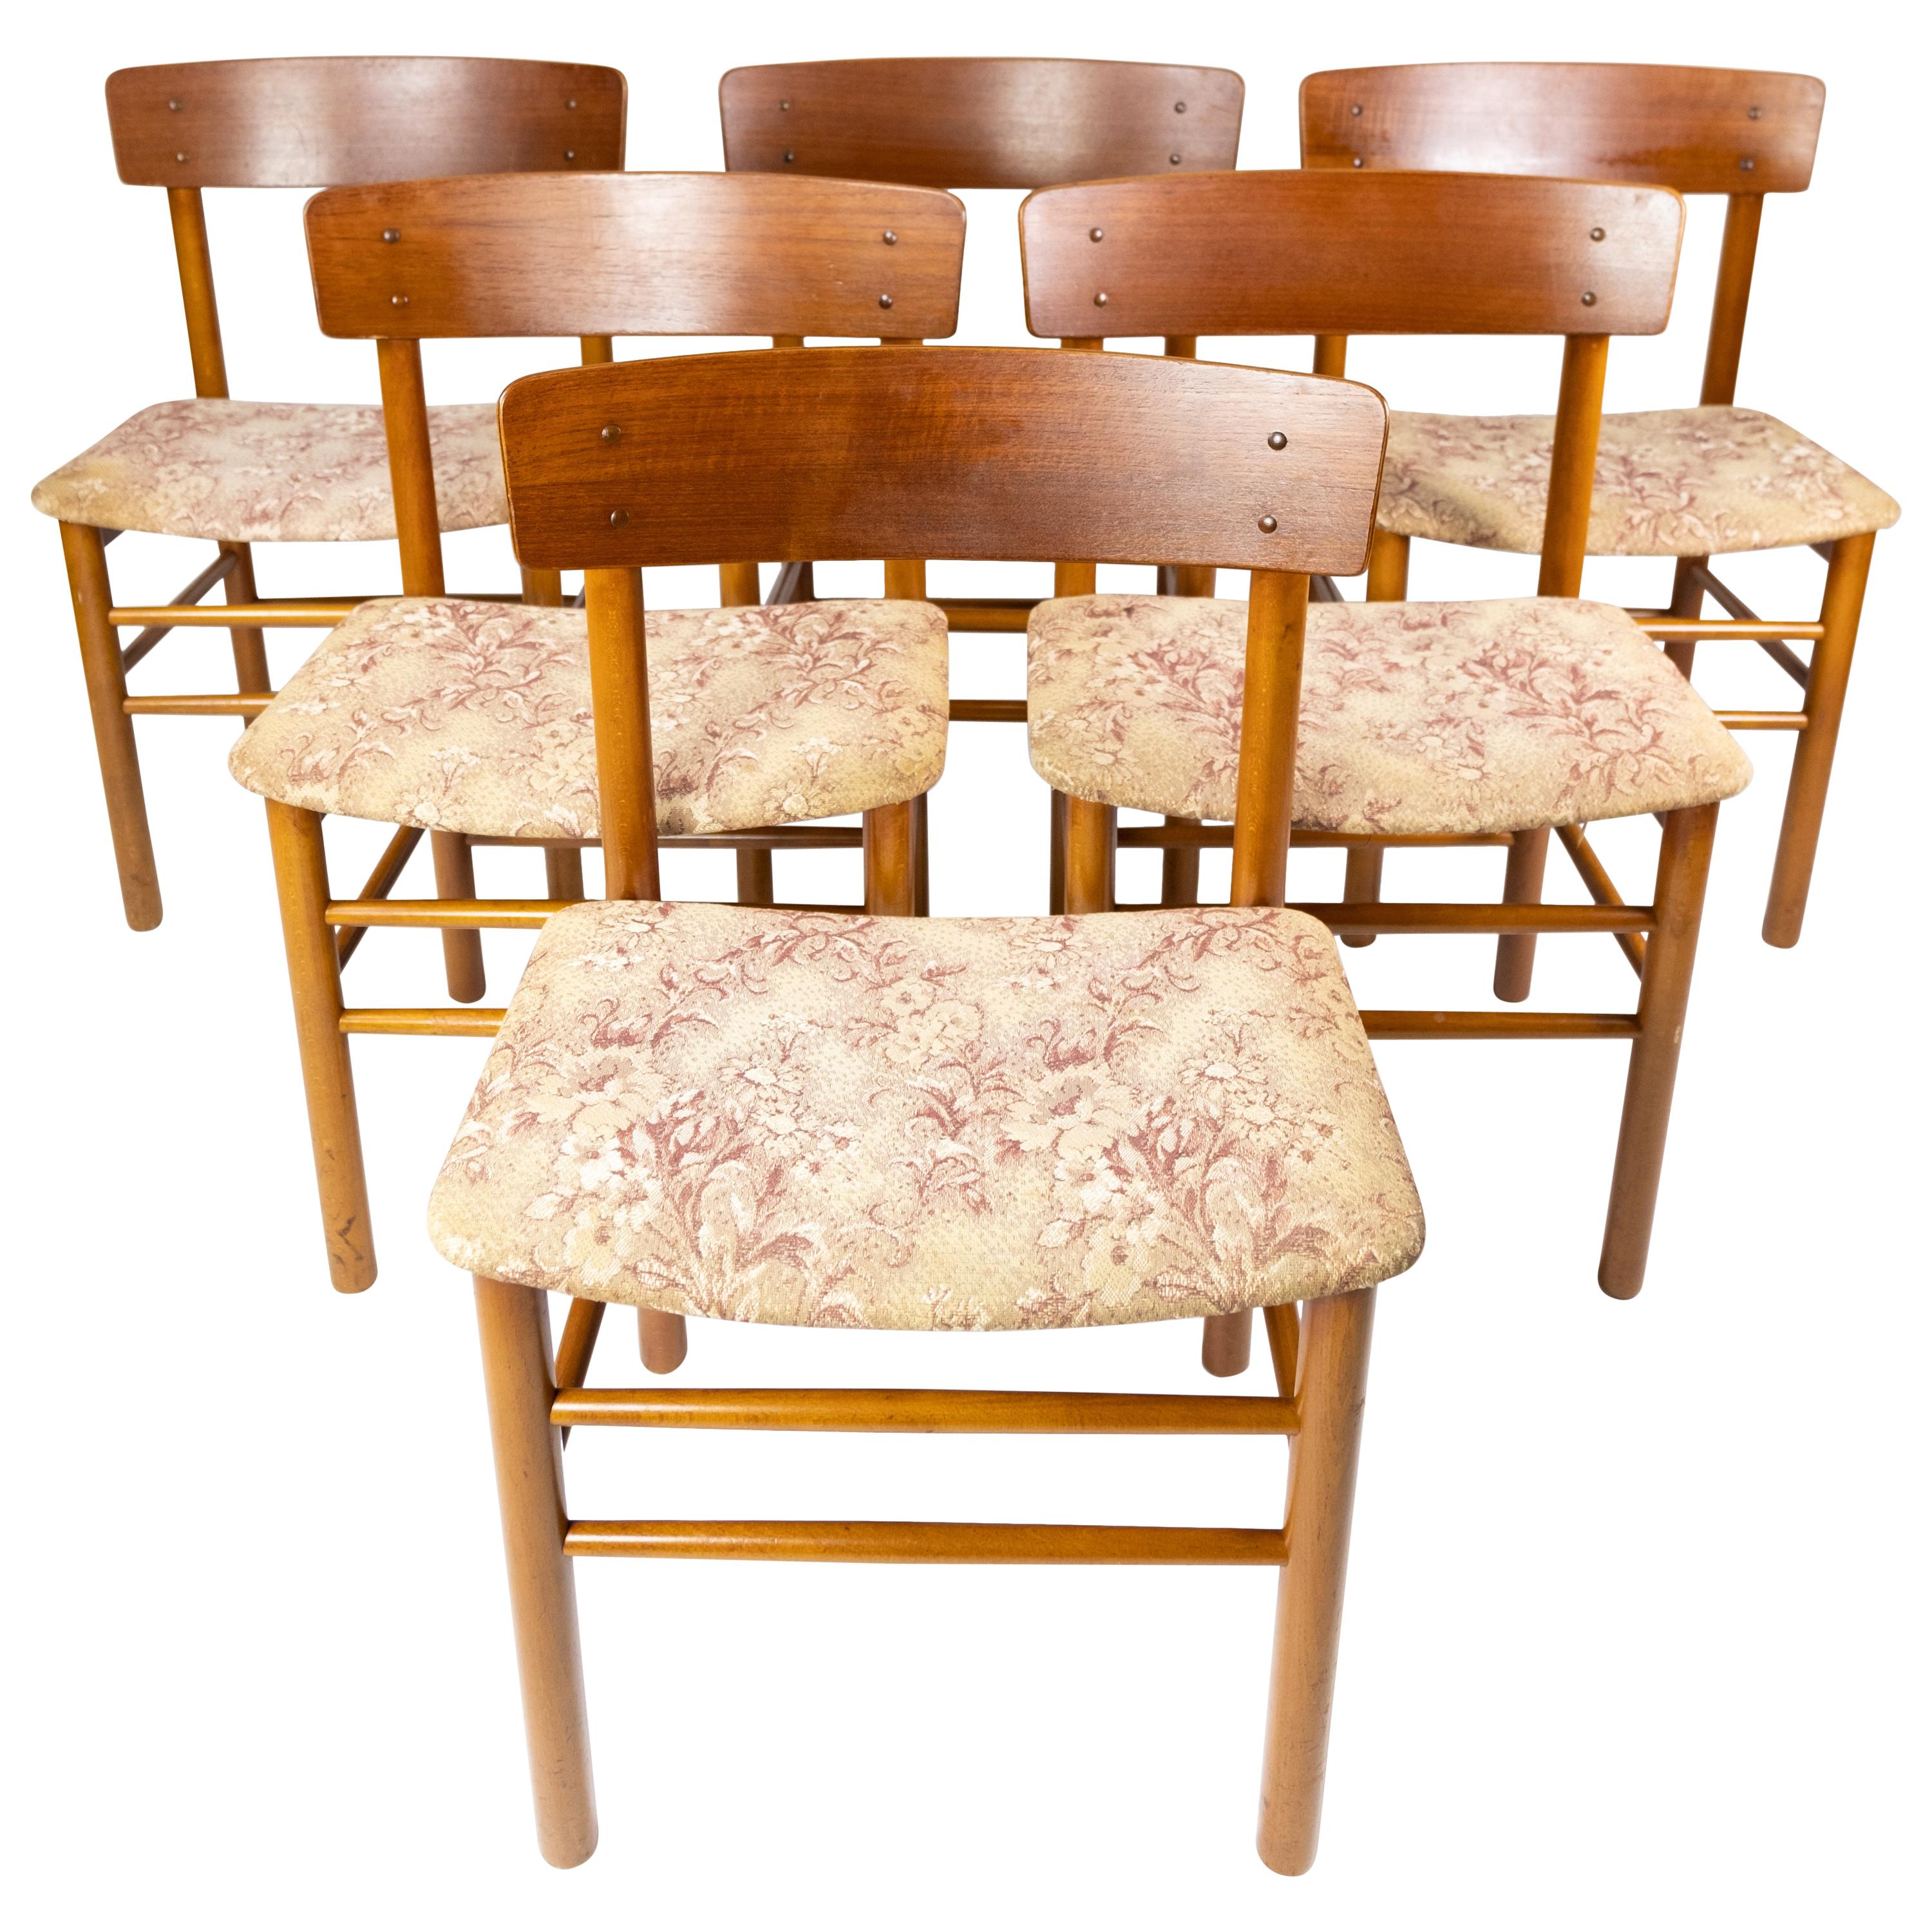 Set of Six Dining Room Chairs of Danish Design from the 1960s